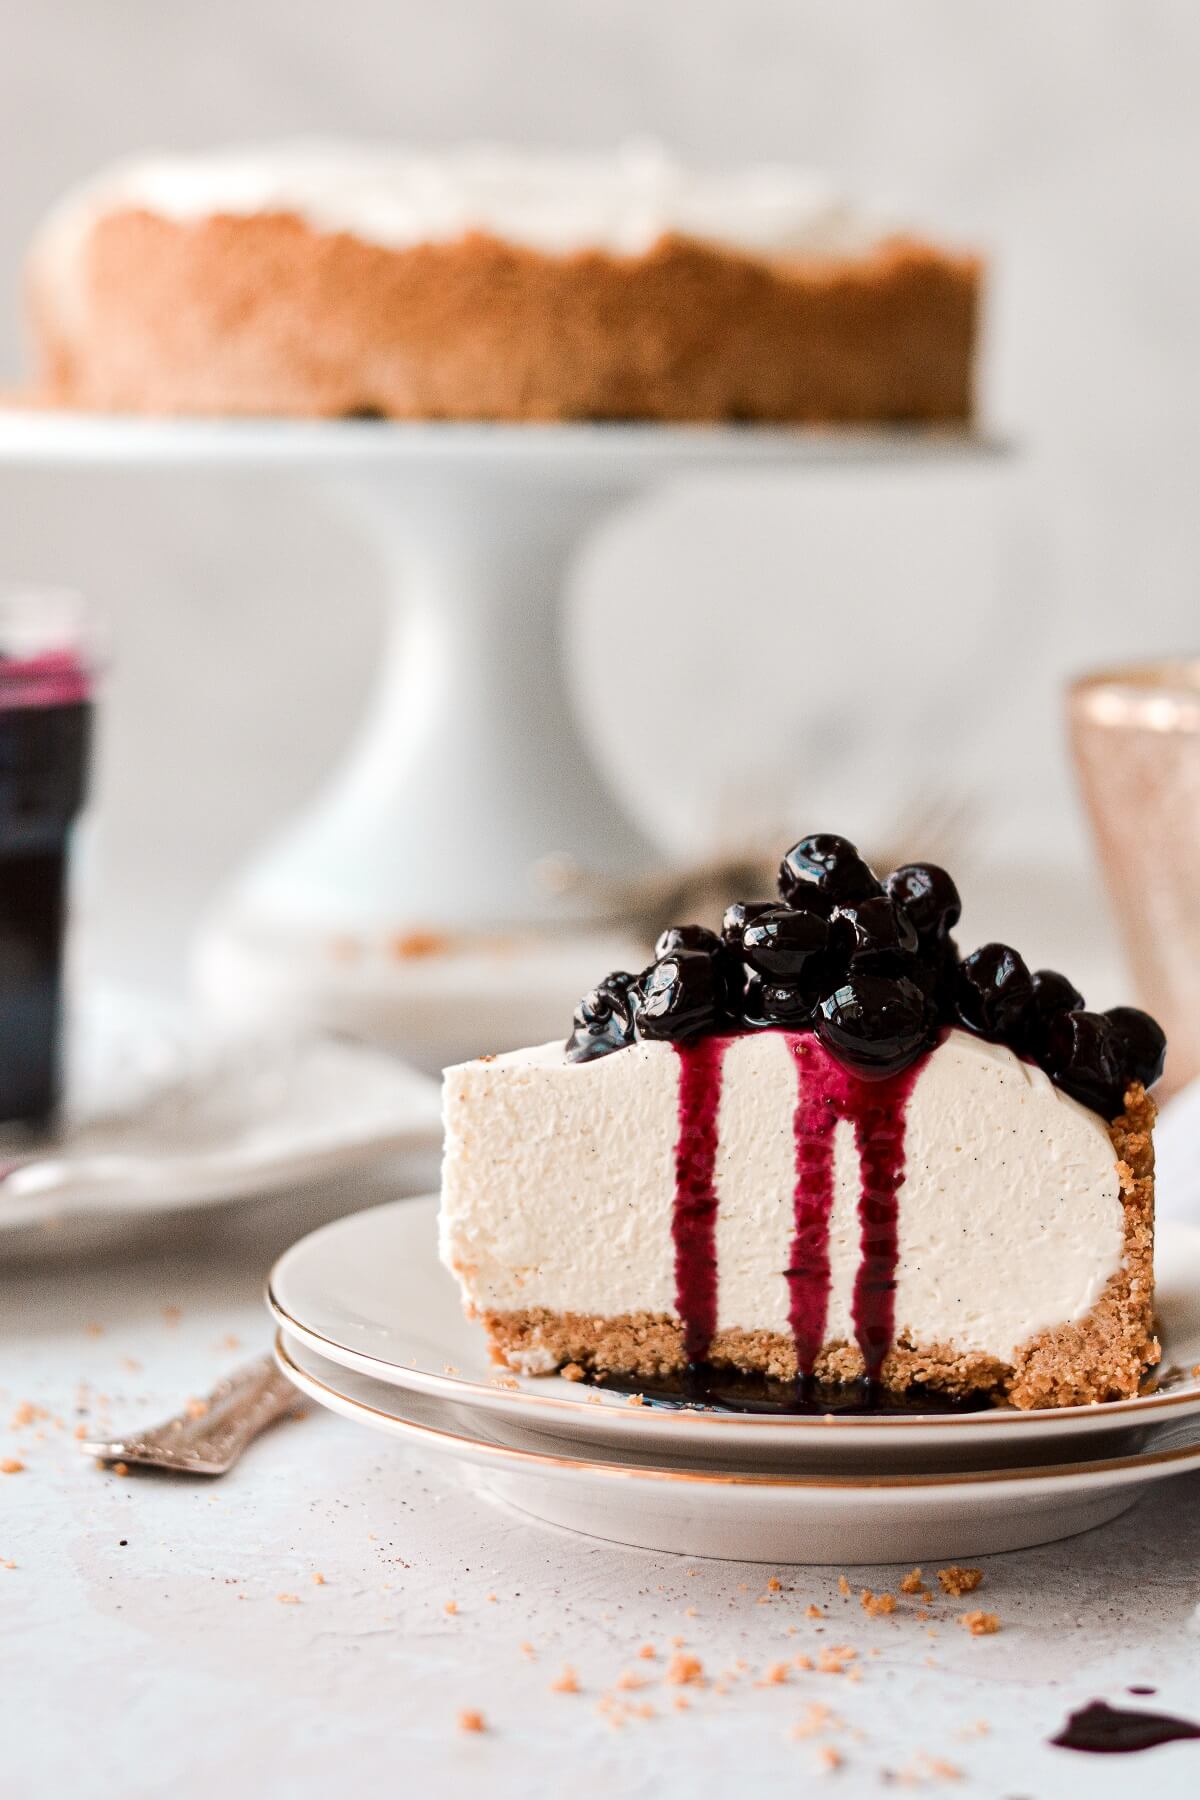 A piece of no bake cheesecake with blueberry sauce.